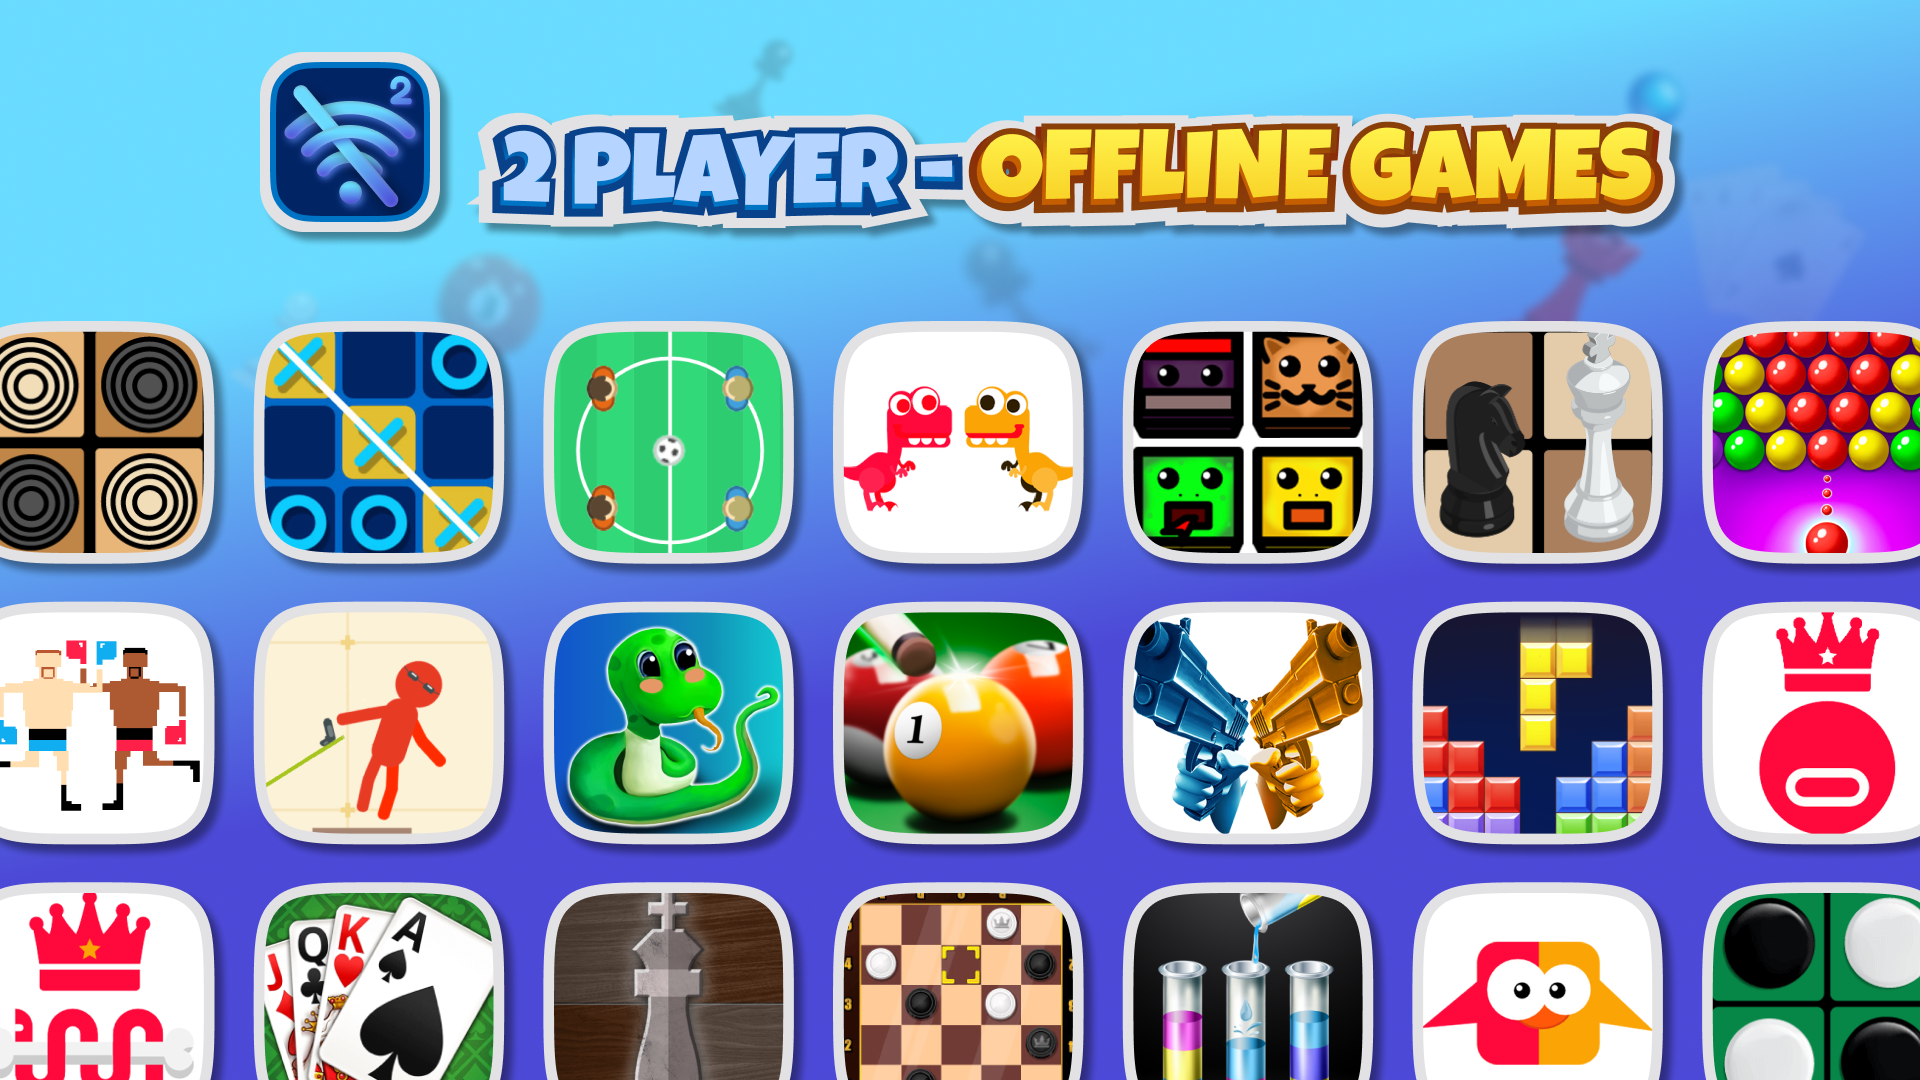 Play 2 Player Offline Games - Two Online for Free on PC & Mobile